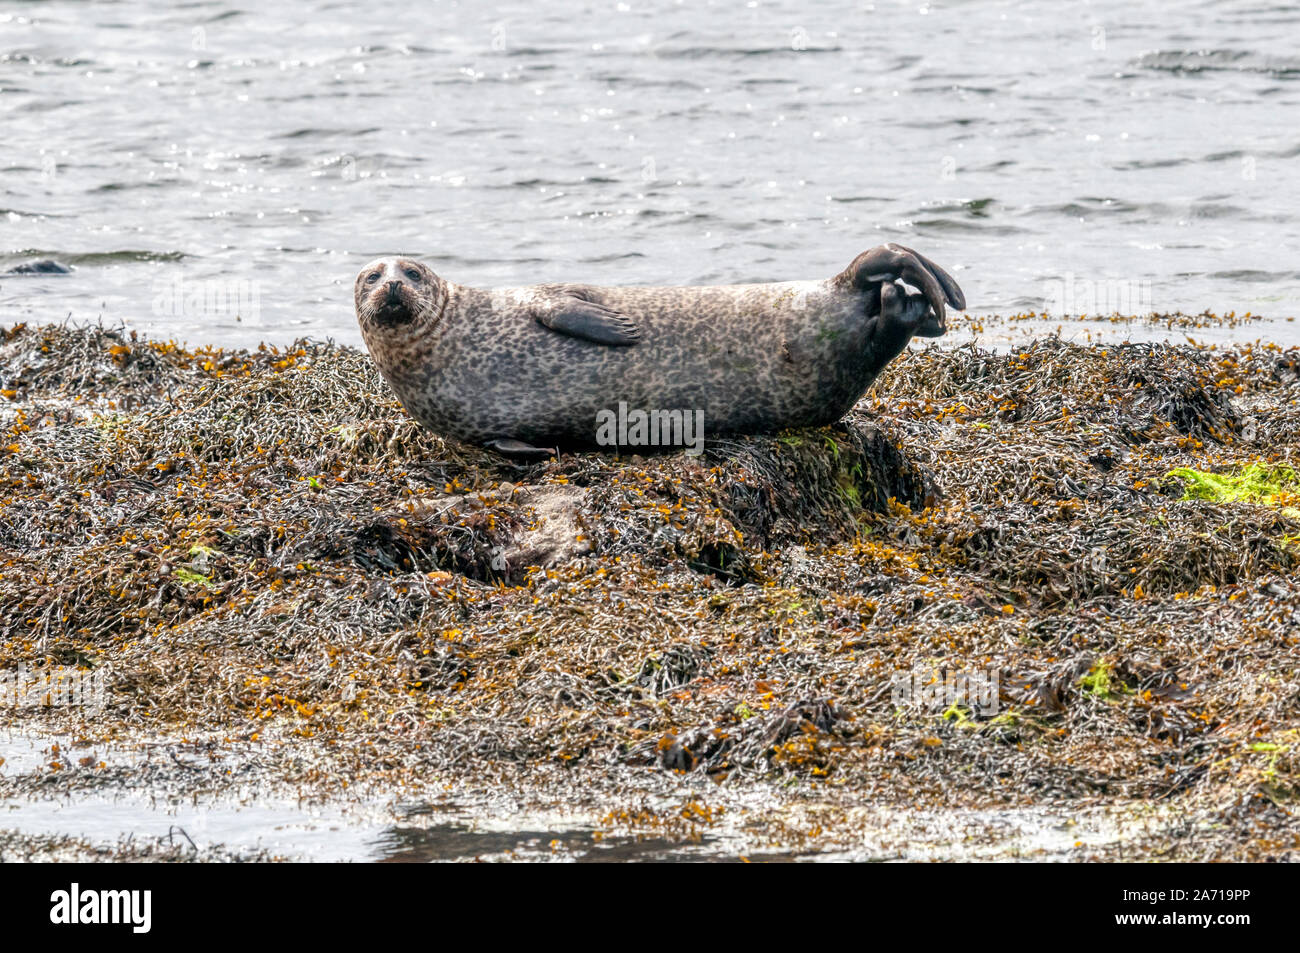 A harbour seal or common seal, Phoca vitulina , hauled out on rocks off Bressay in Shetland. Stock Photo